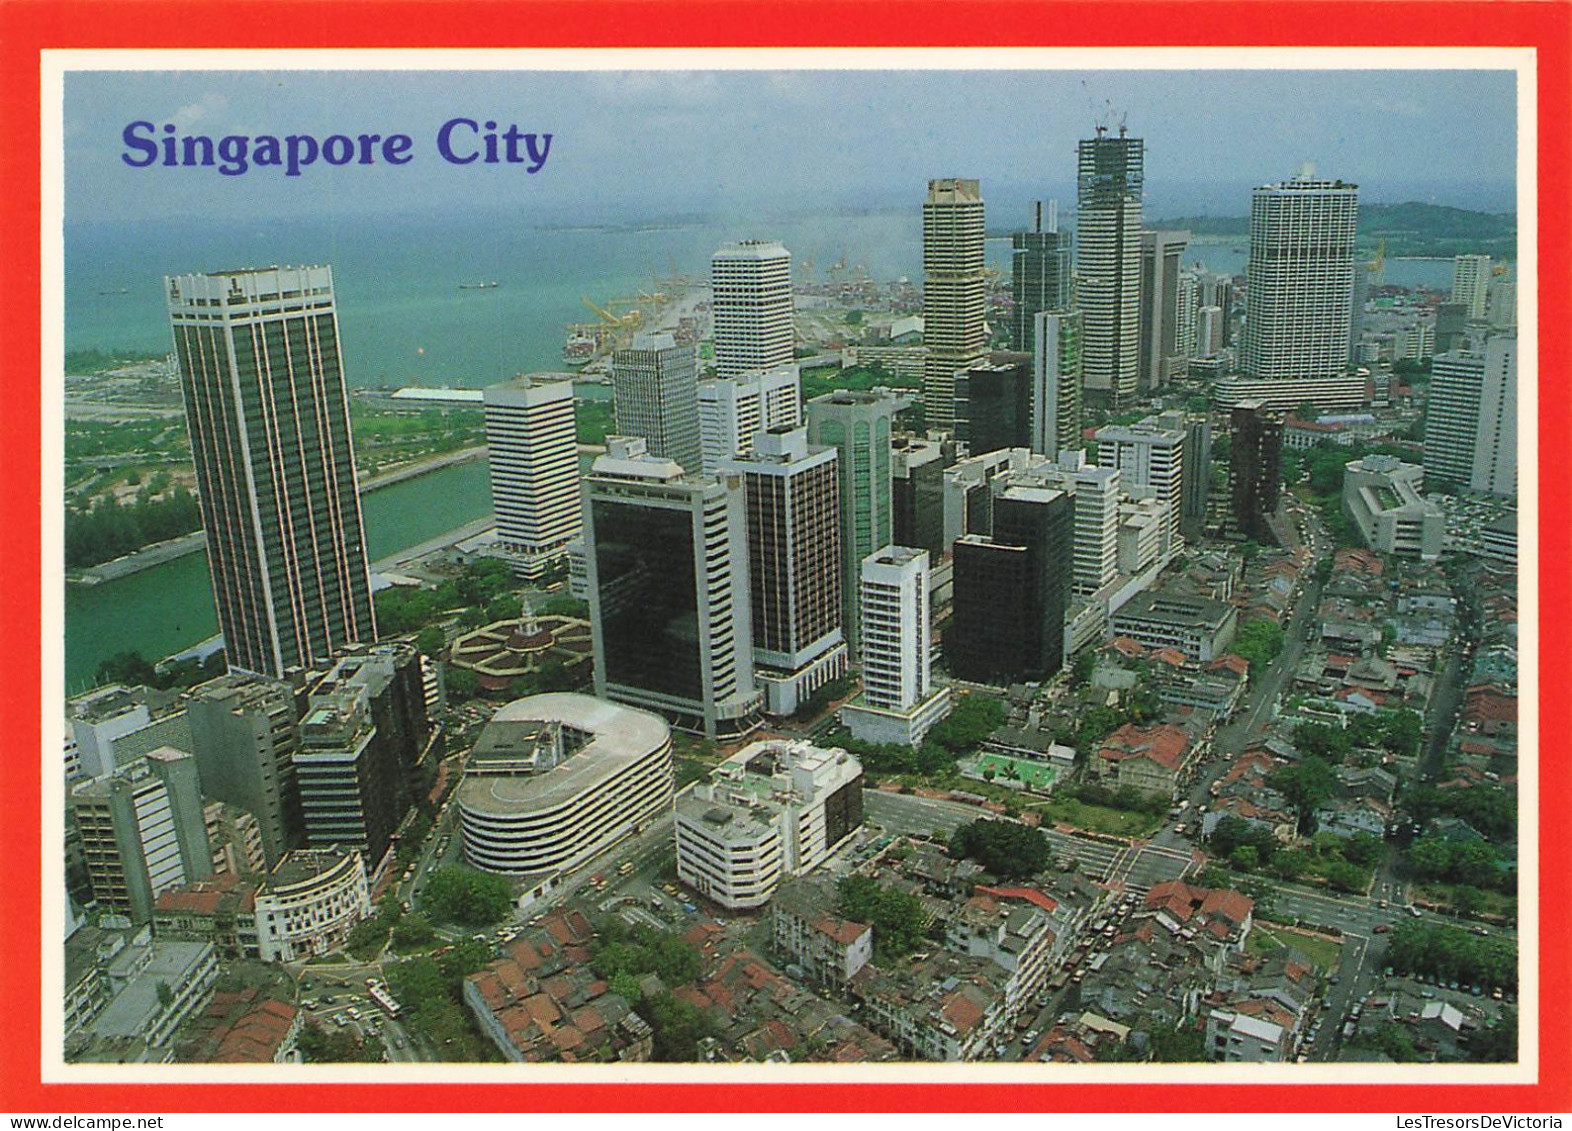 SINGAPOUR - Singapore City - Singapore's Commercial And Financial Hub In The Harbour City Area  - Carte Postale - Singapur